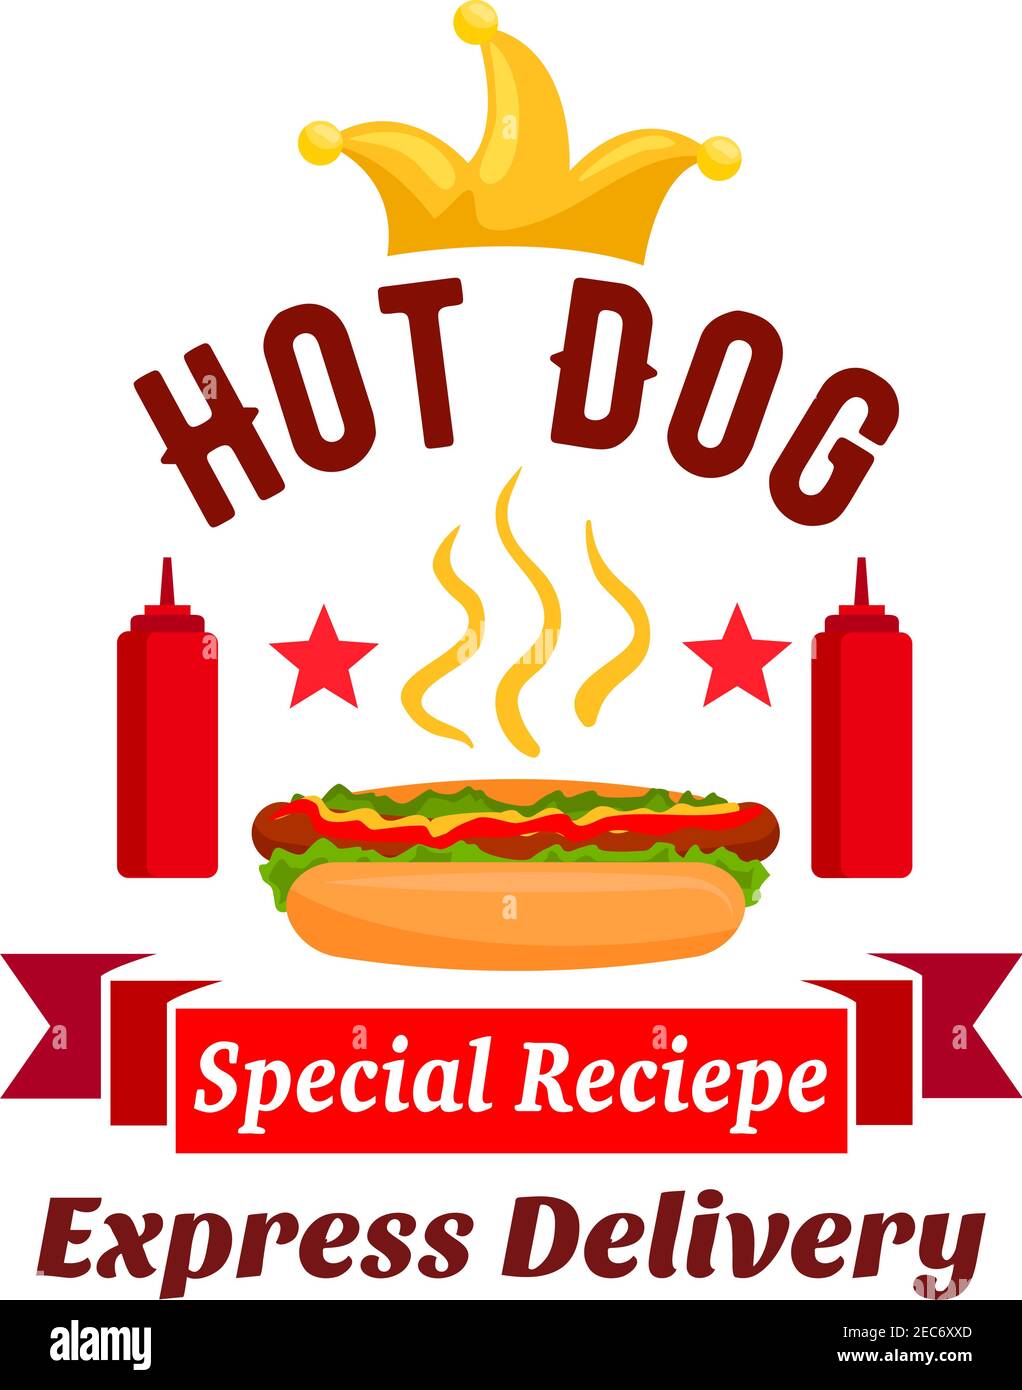 Fast food xpress delivery emblem. hot dog label element with ketchup bottles, golden crown, stars, red ribbon. Vector icon for restaurant, eatery, men Stock Vector